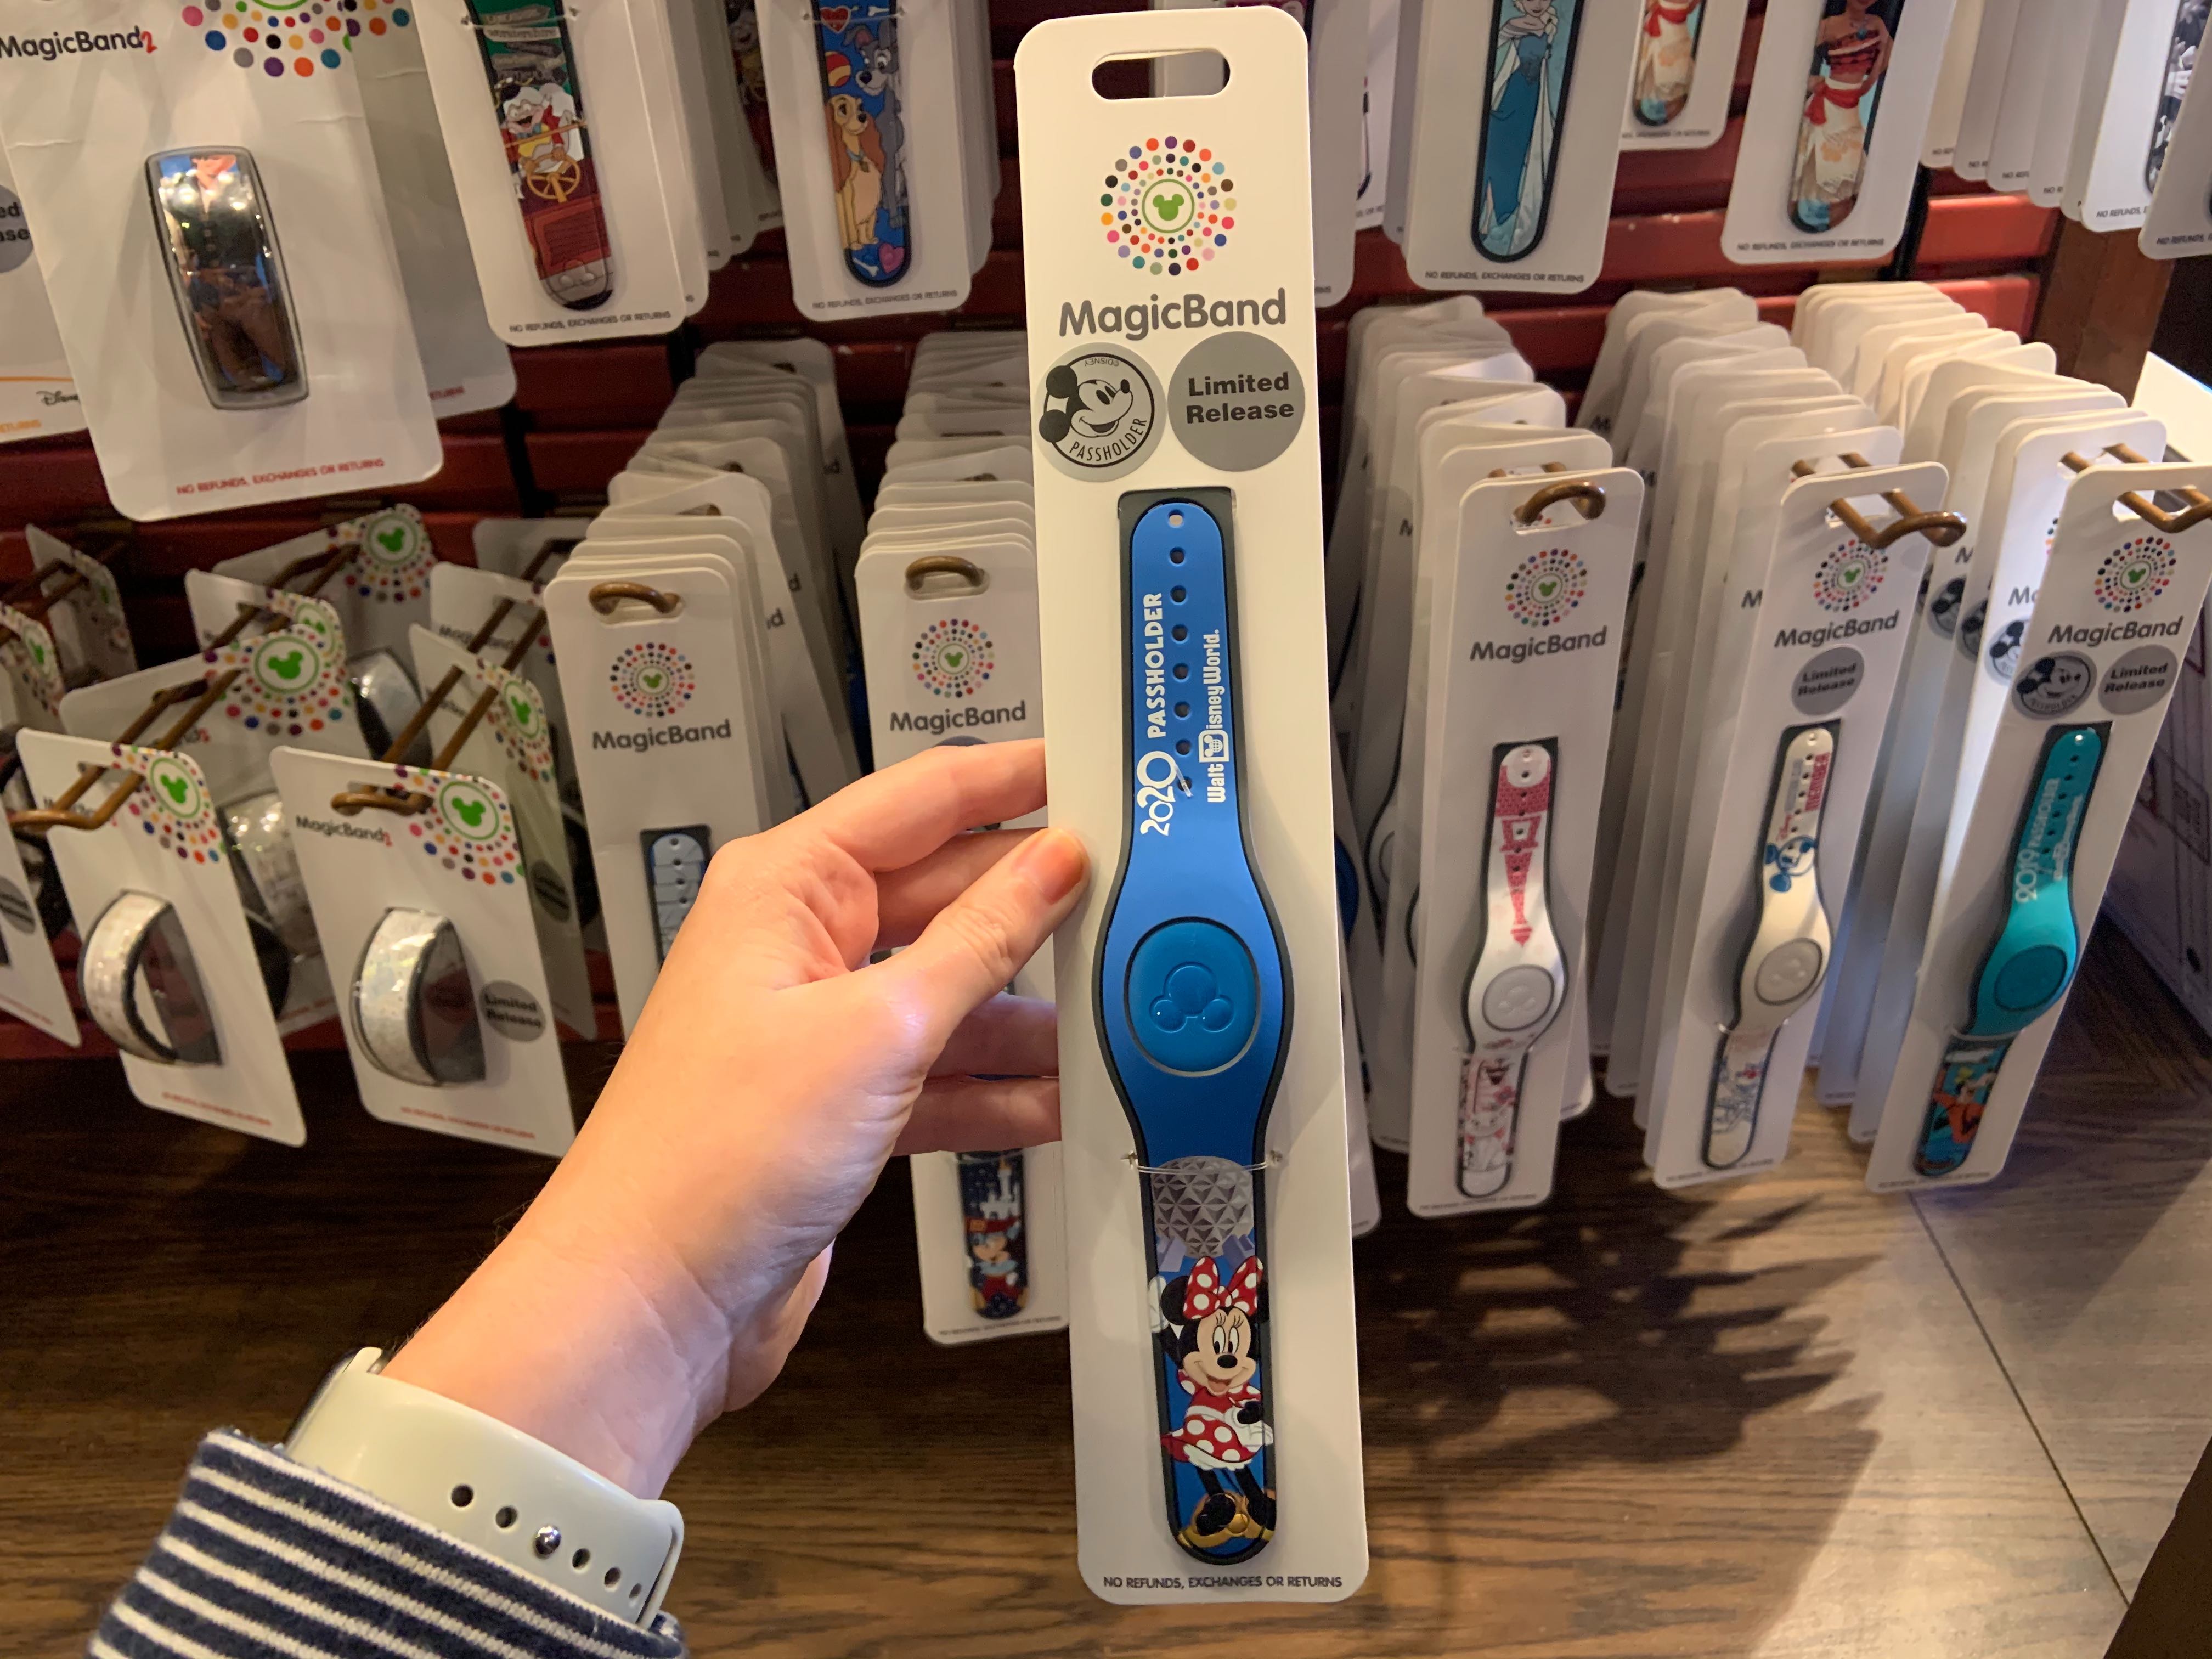 NEW Details about   Disney Parks 2020 Passholder Donald Duck Tower Terror LR Magic Band WDW